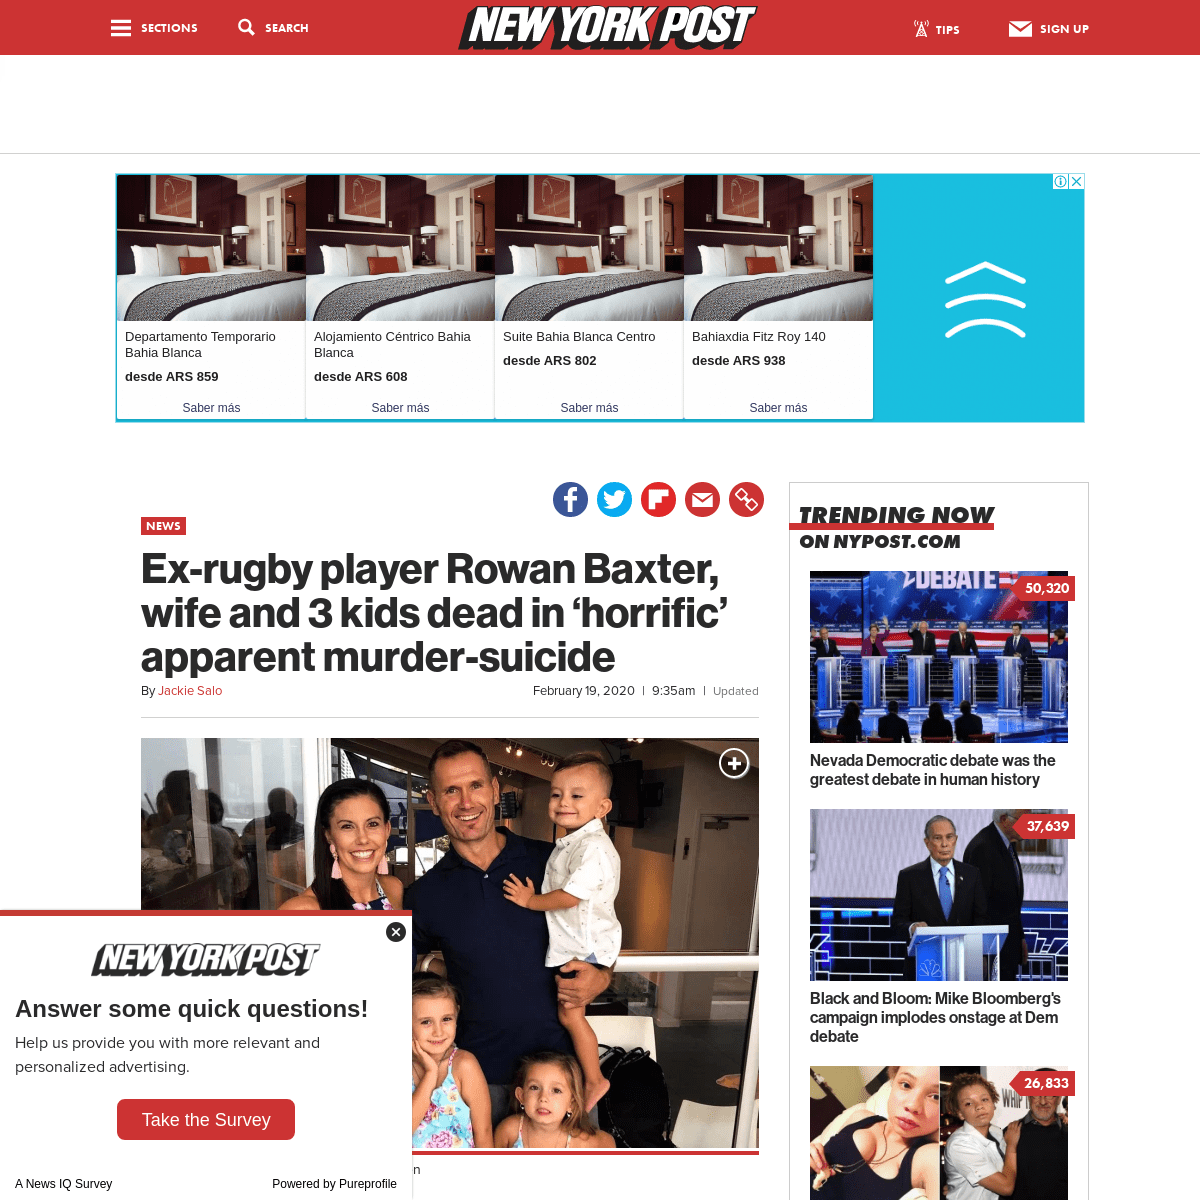 A complete backup of nypost.com/2020/02/19/ex-rugby-player-rowan-baxter-wife-and-3-kids-dead-in-horrific-apparent-murder-suicide